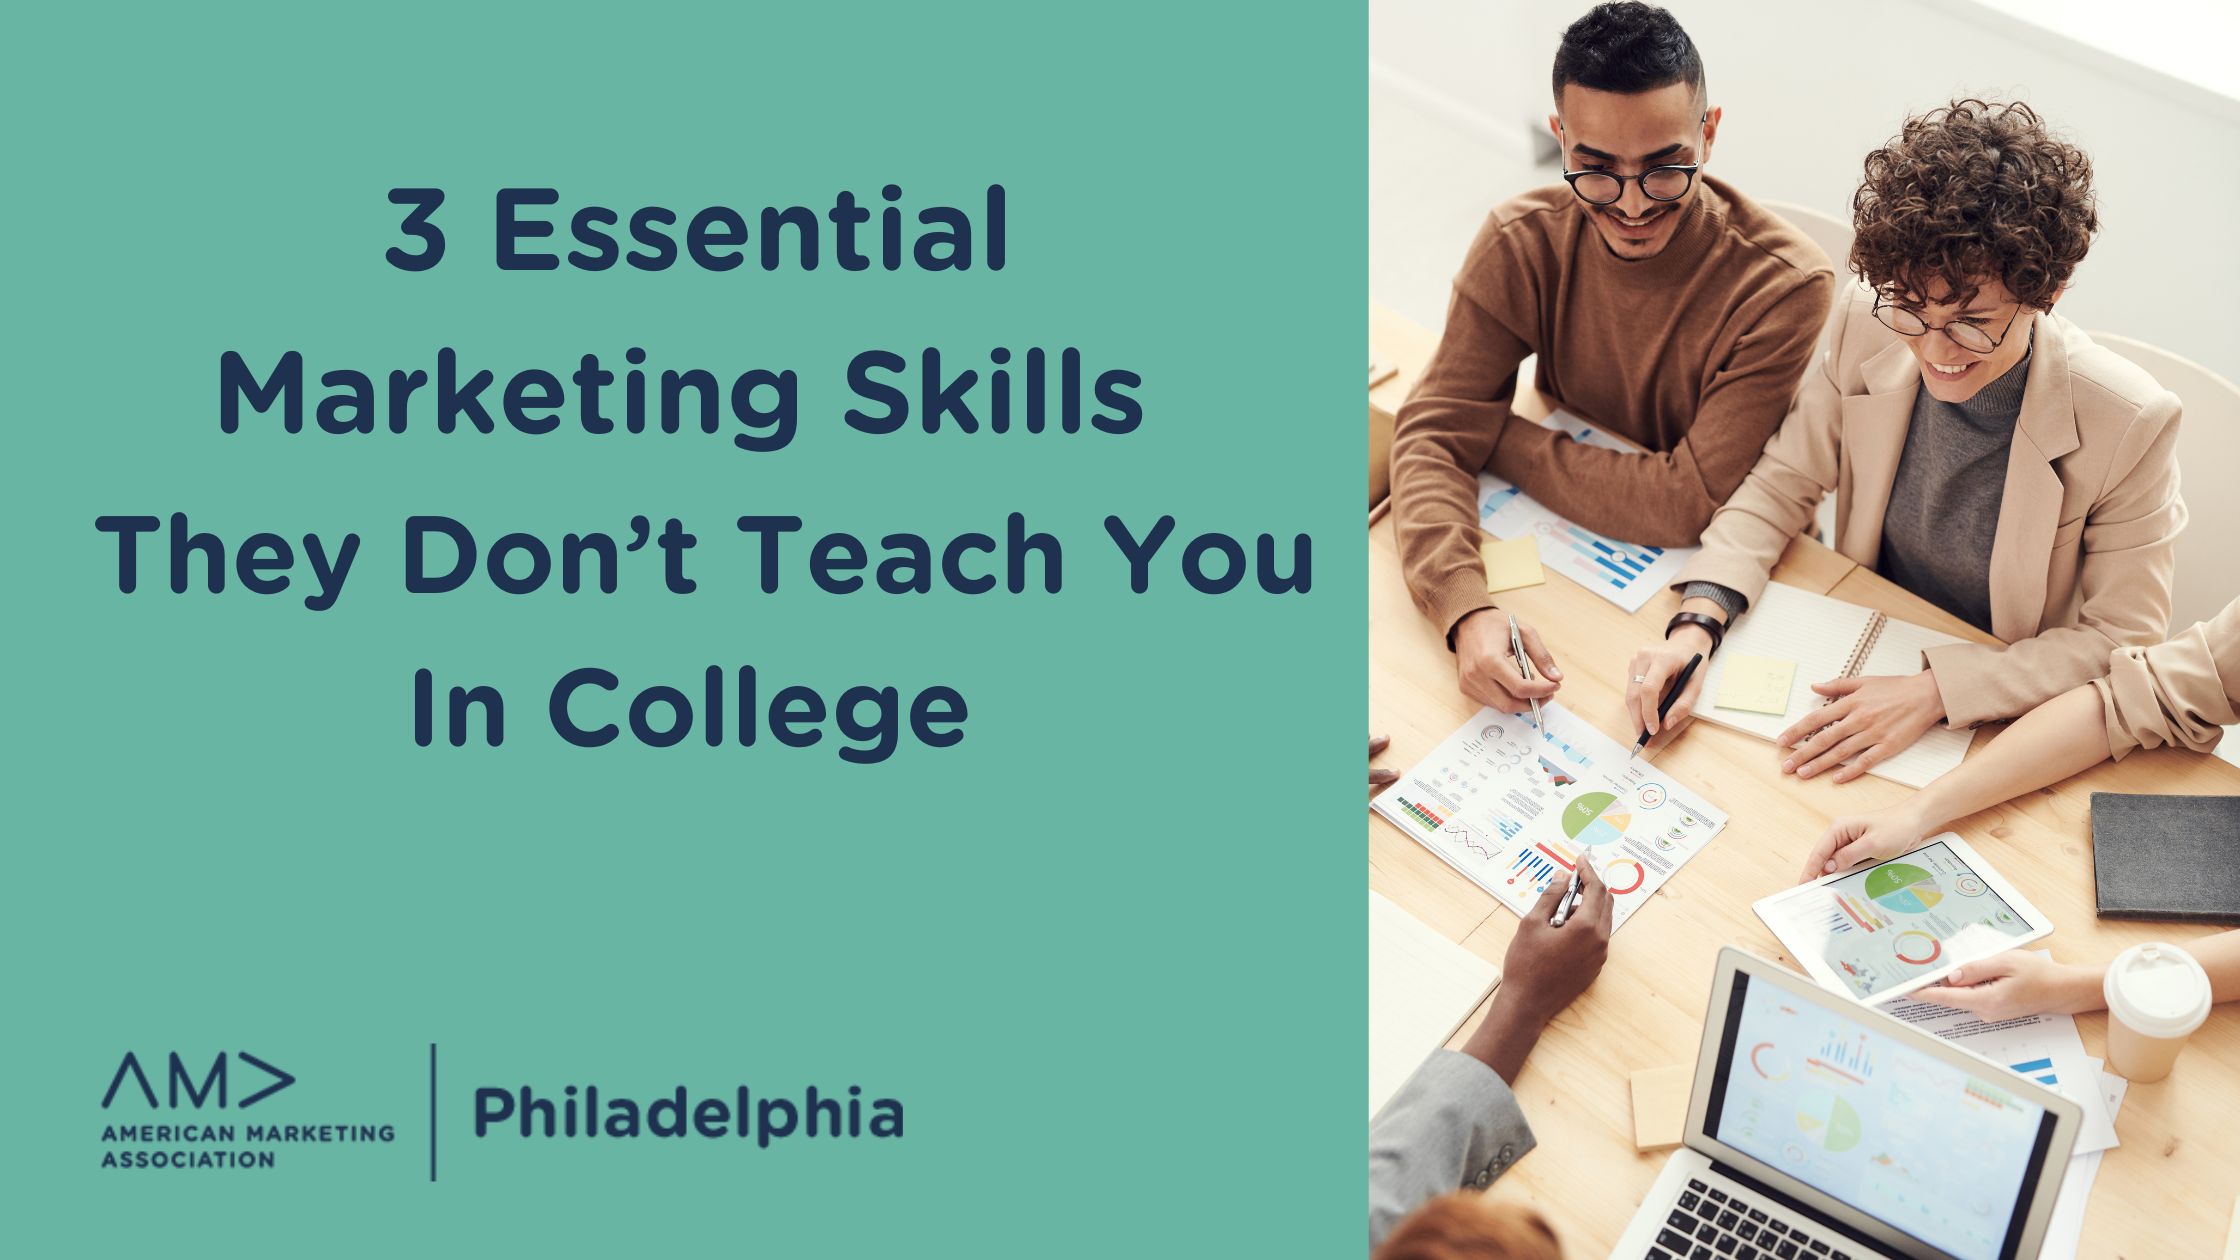 3 Essential Marketing Skills They Don’t Teach You In College